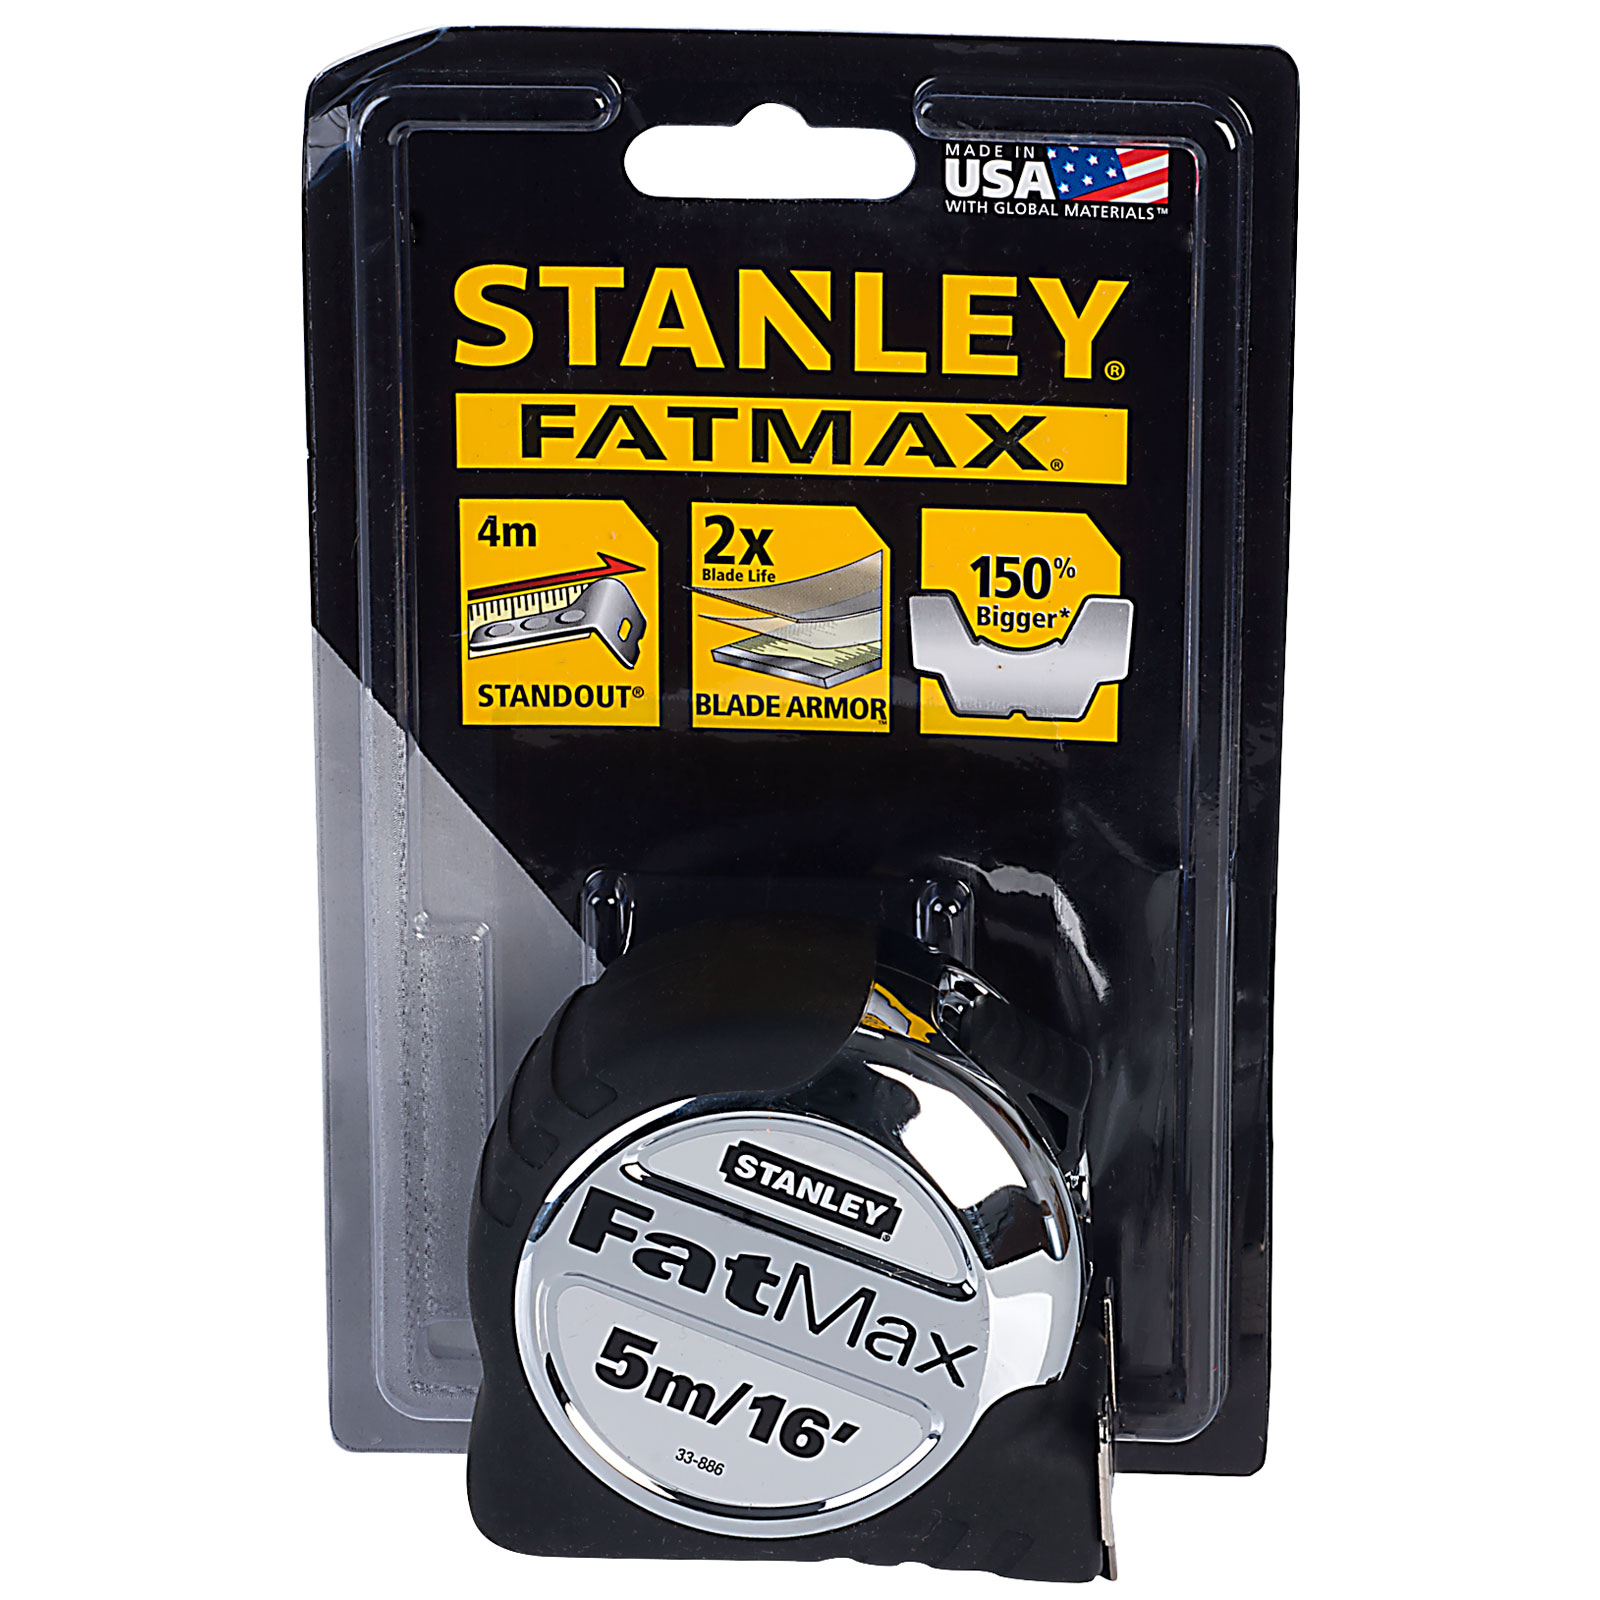 Stanley FatMax Xtreme 5m/16ft Tape Measure, 5-33-886